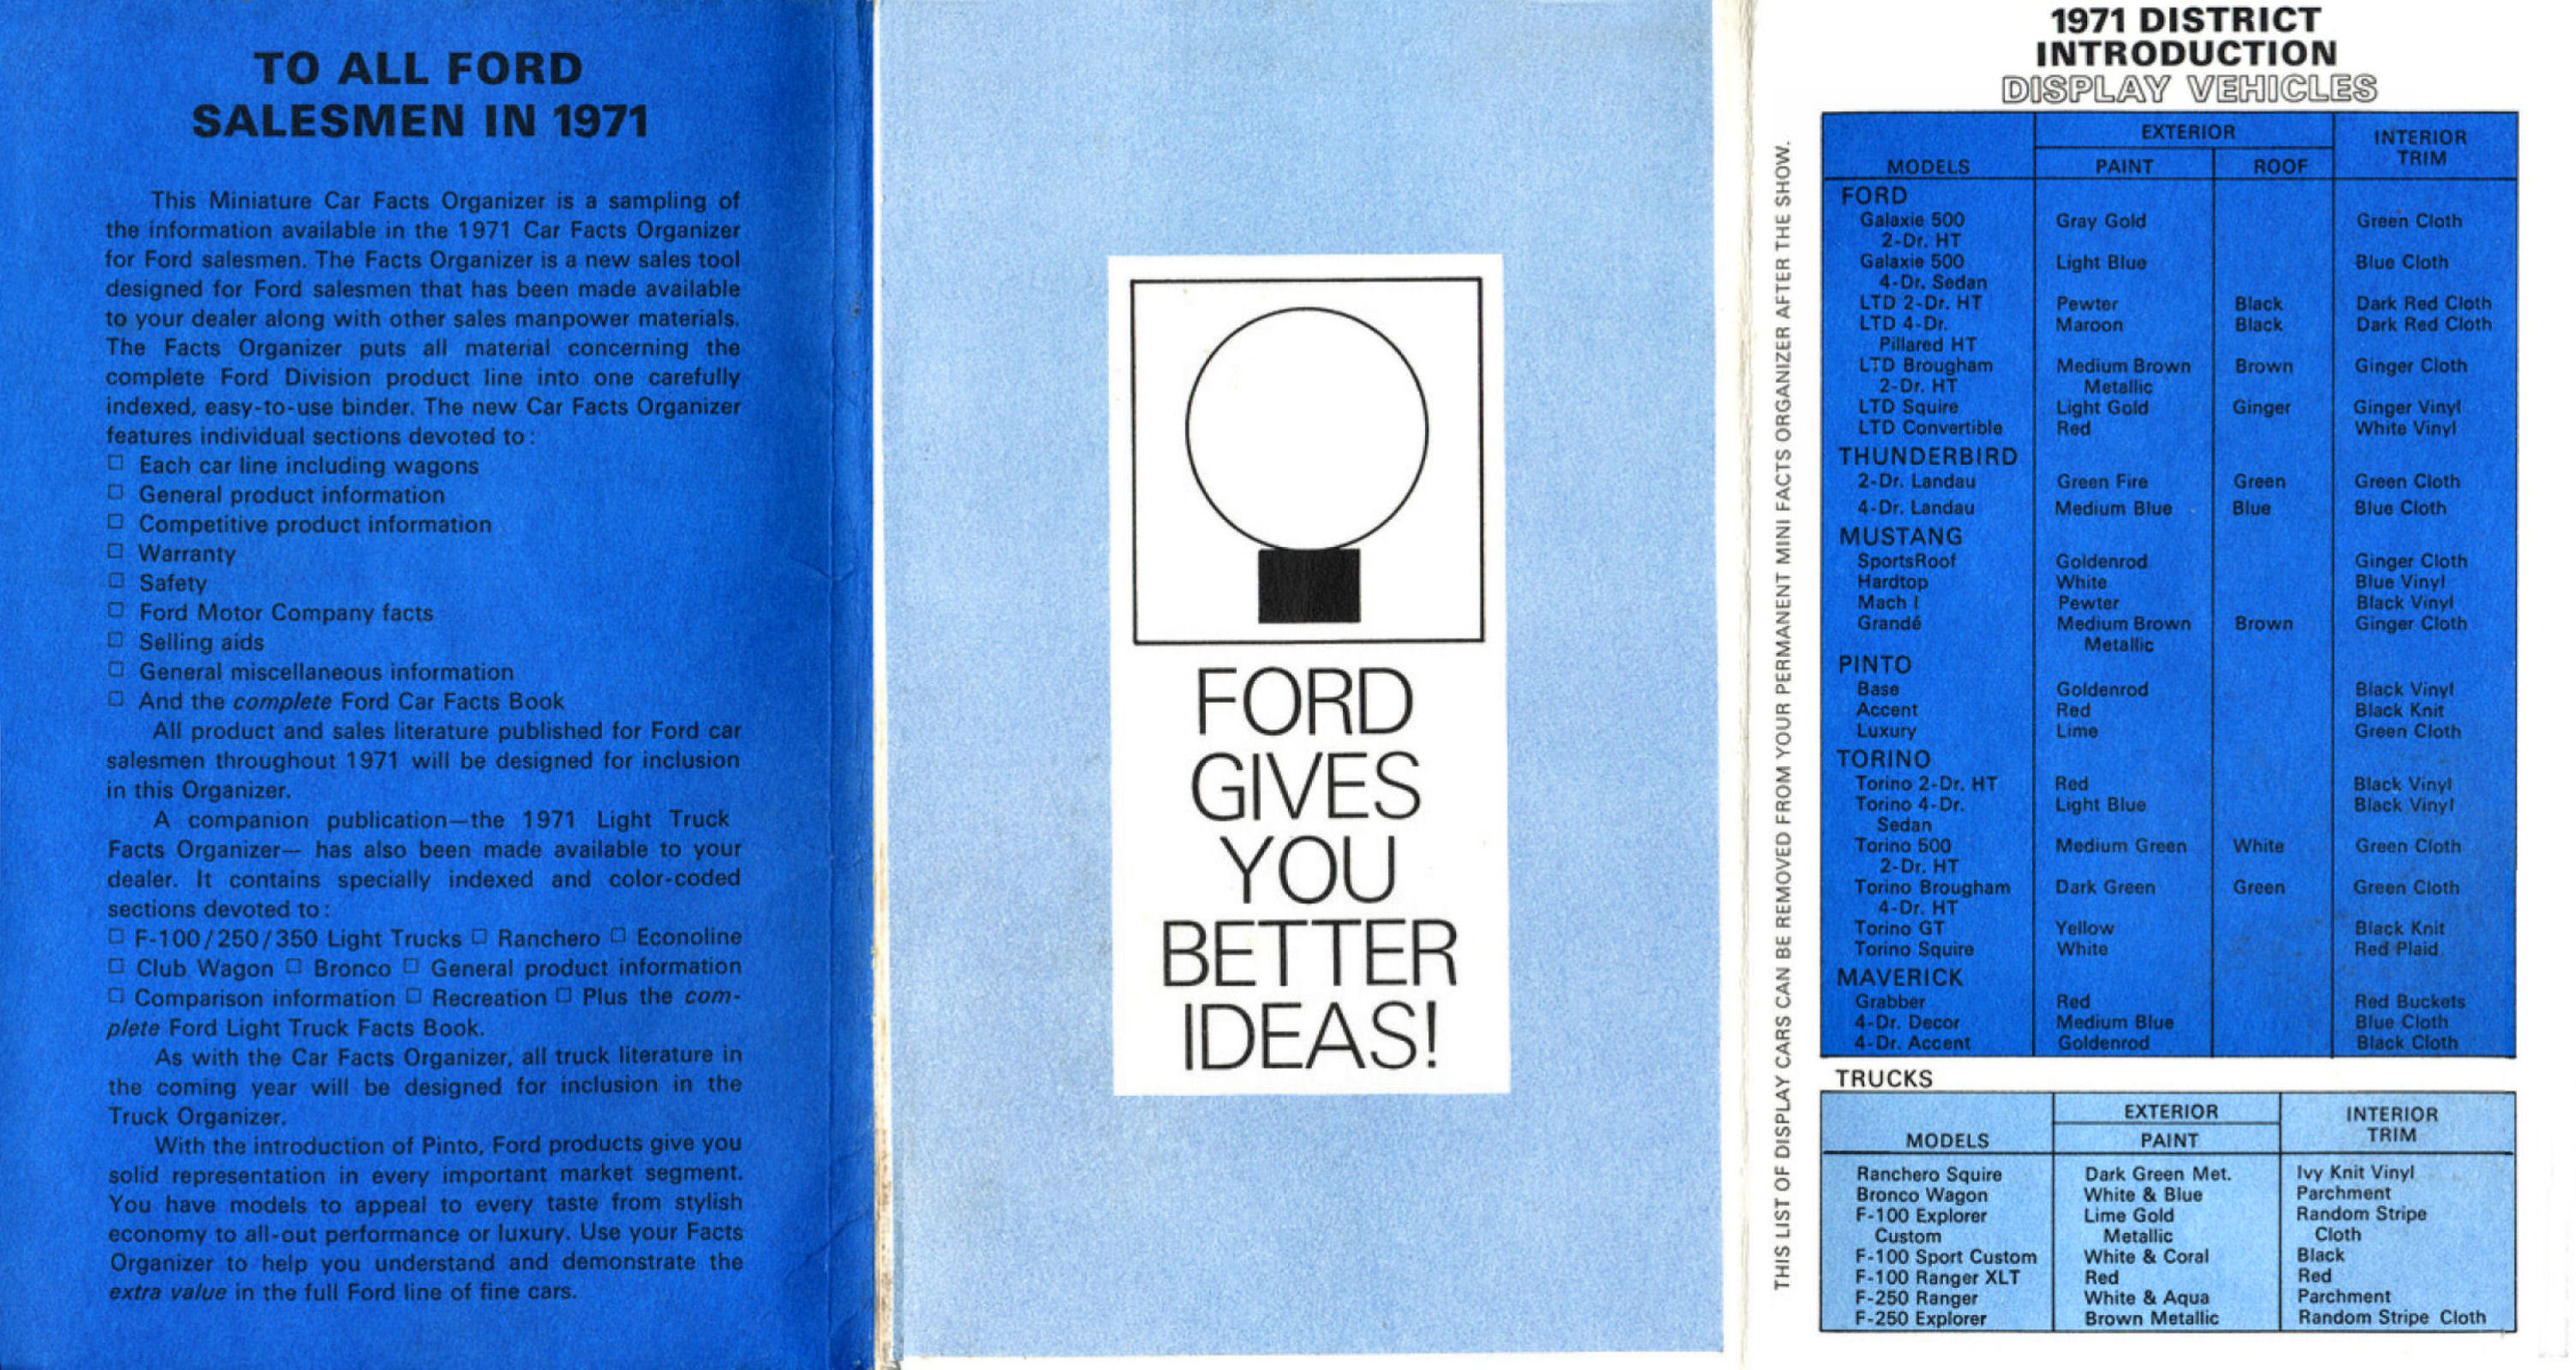 1971 Ford Product information-04-05-06